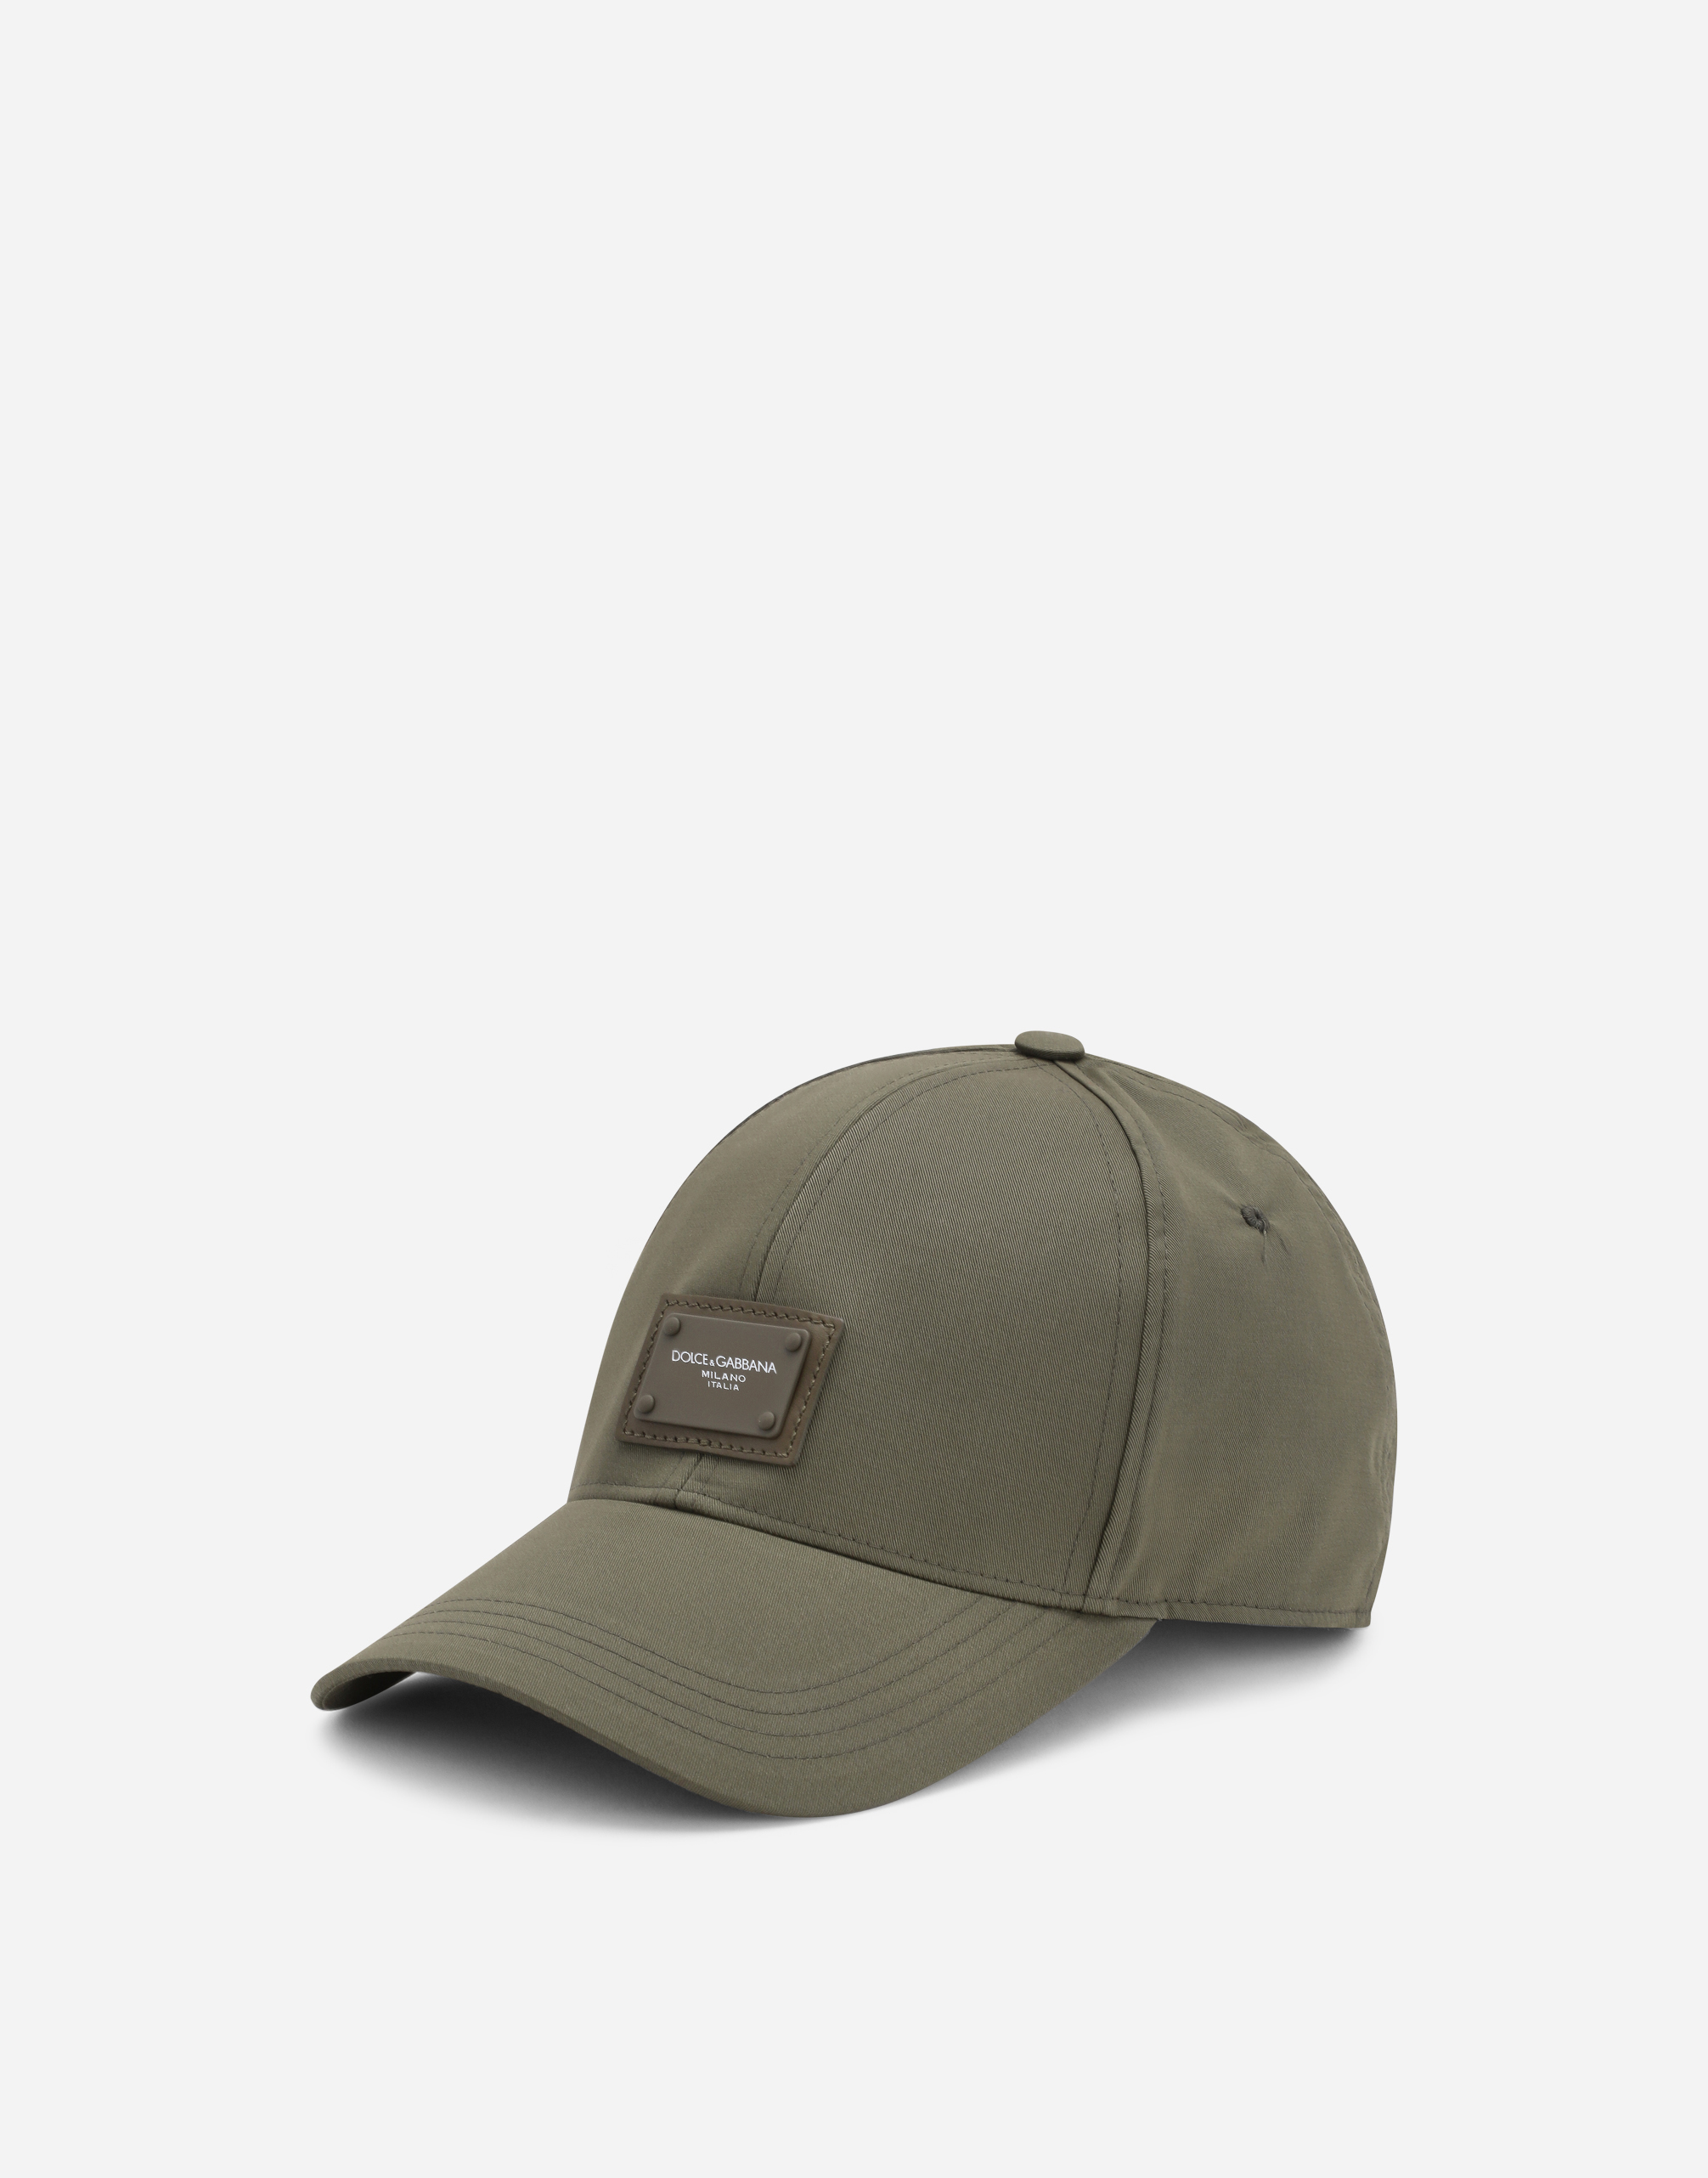 Baseball cap with branded plate in Green